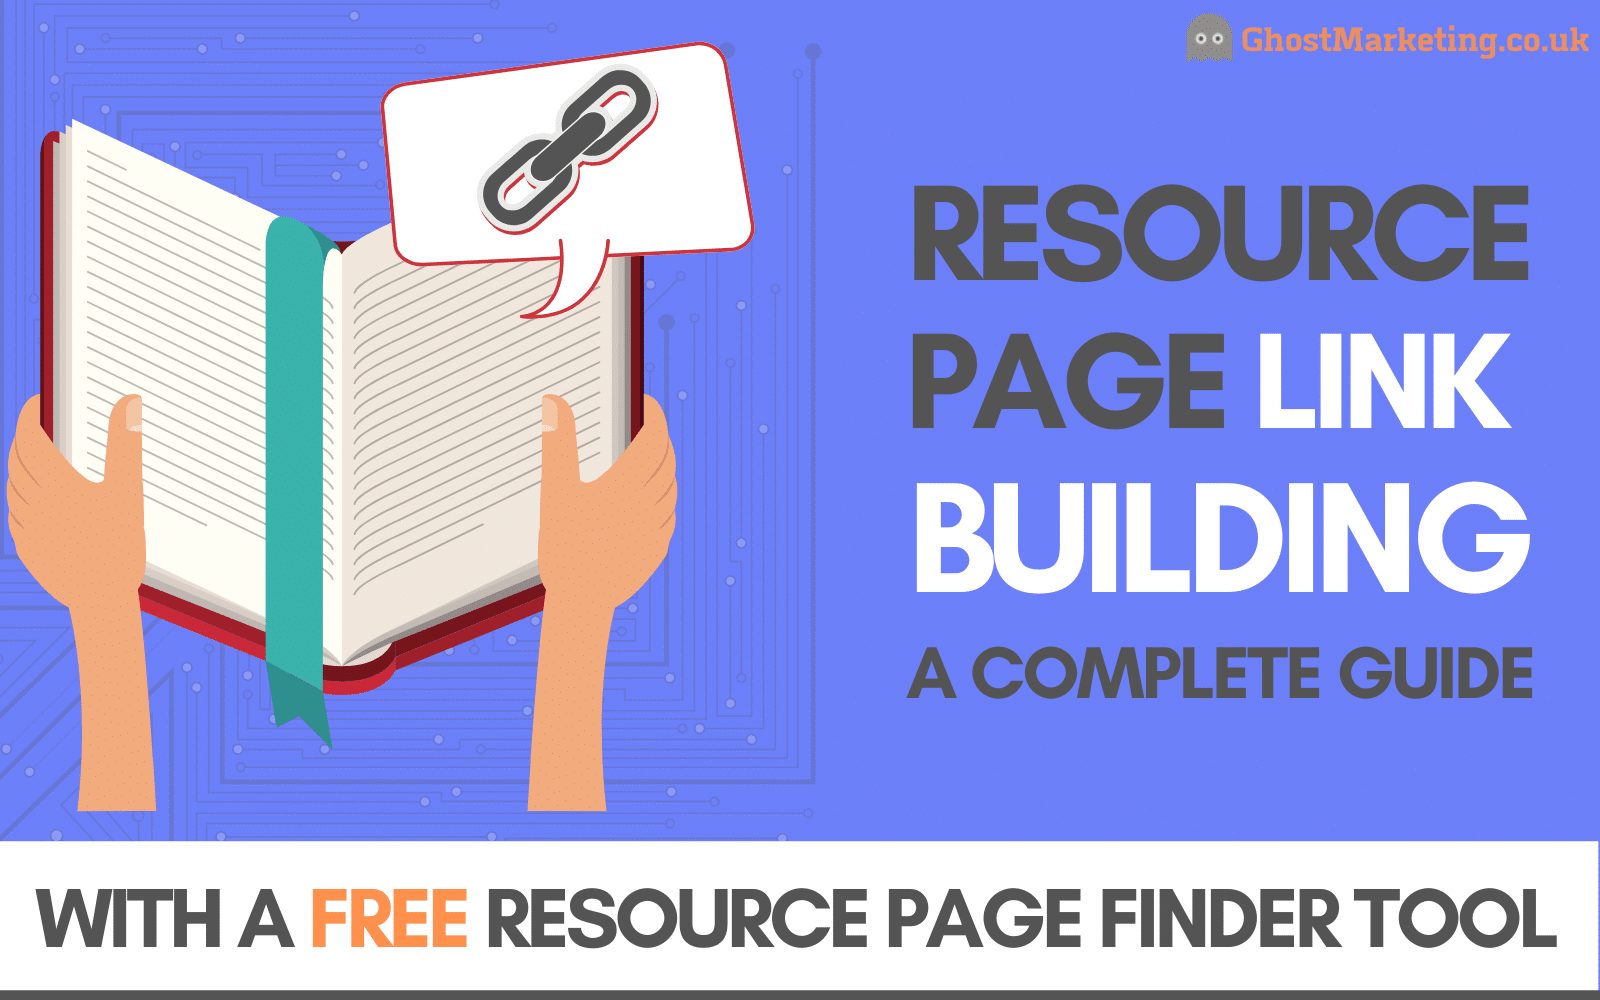 Resource Page Link Building Guide - Build Backlinks Using Links Pages